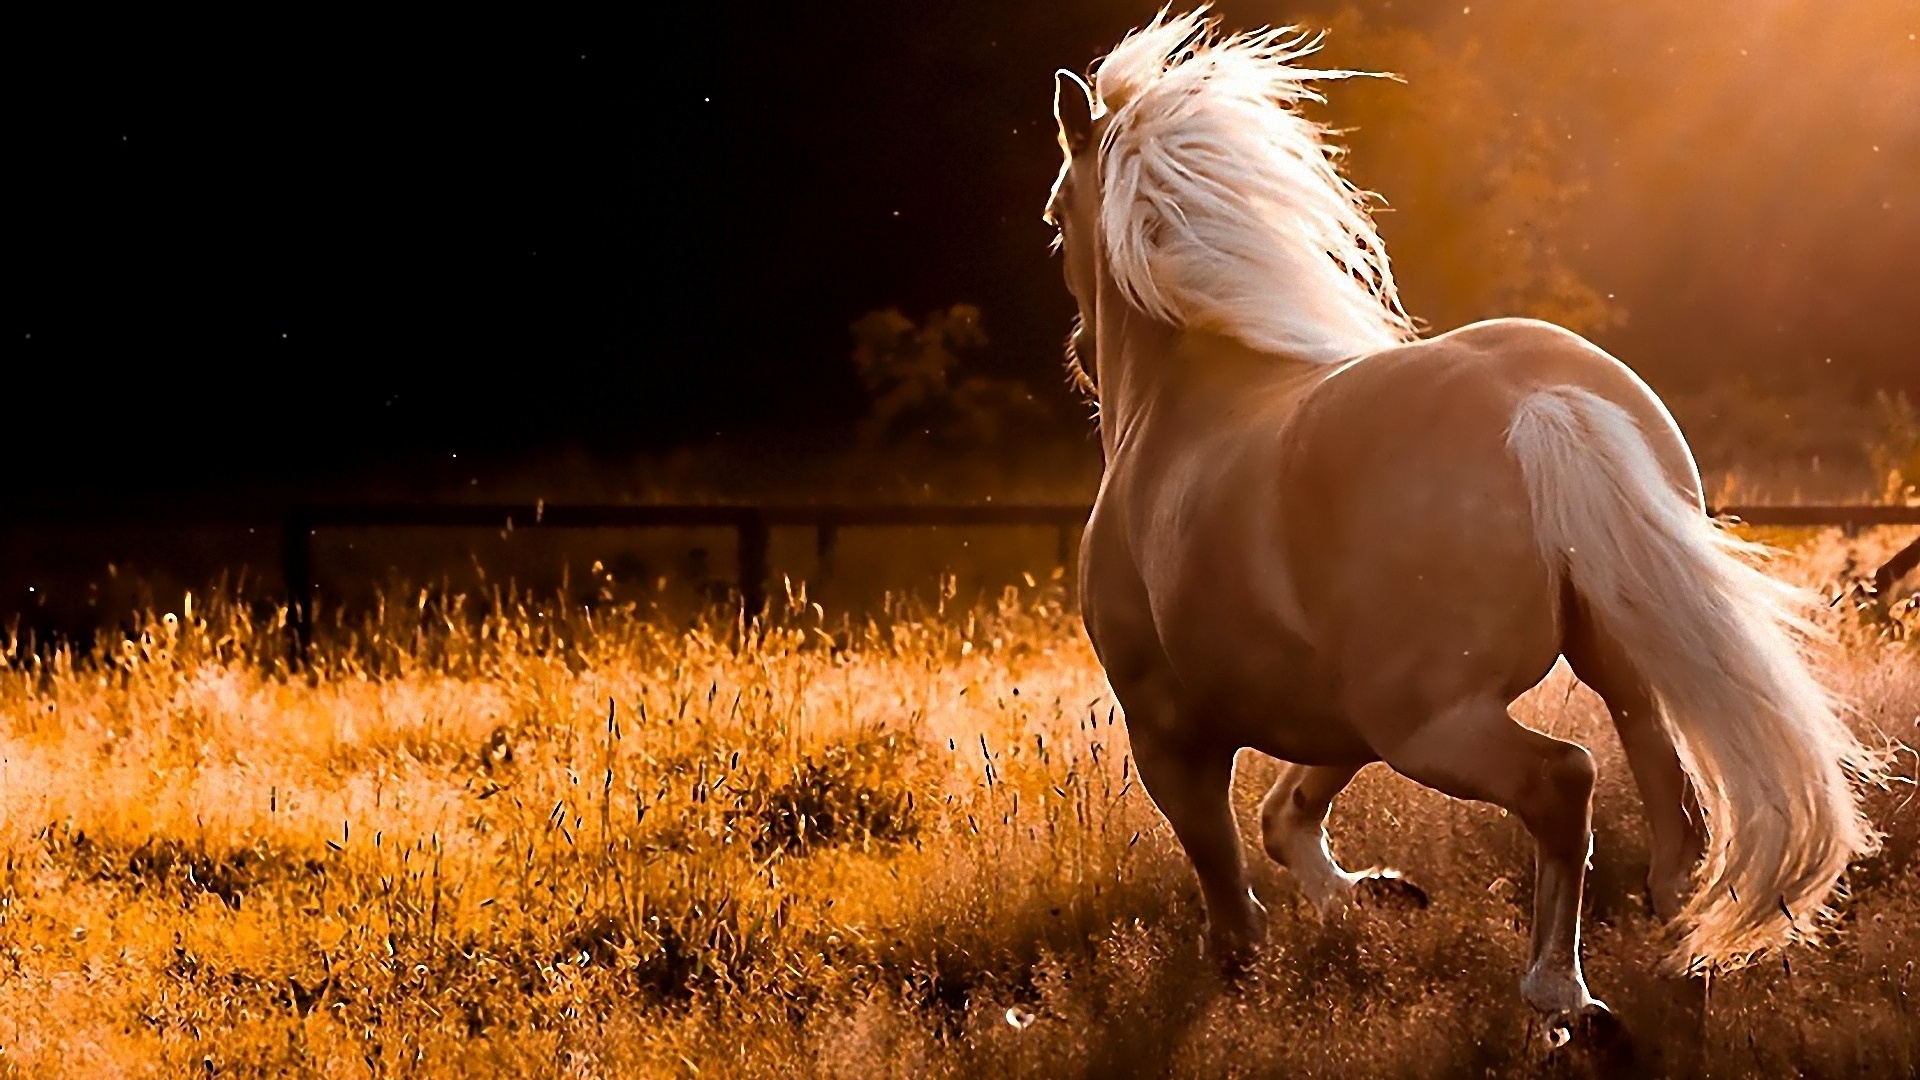 wallpapers running horse wallpapers running horse hd wallpapers